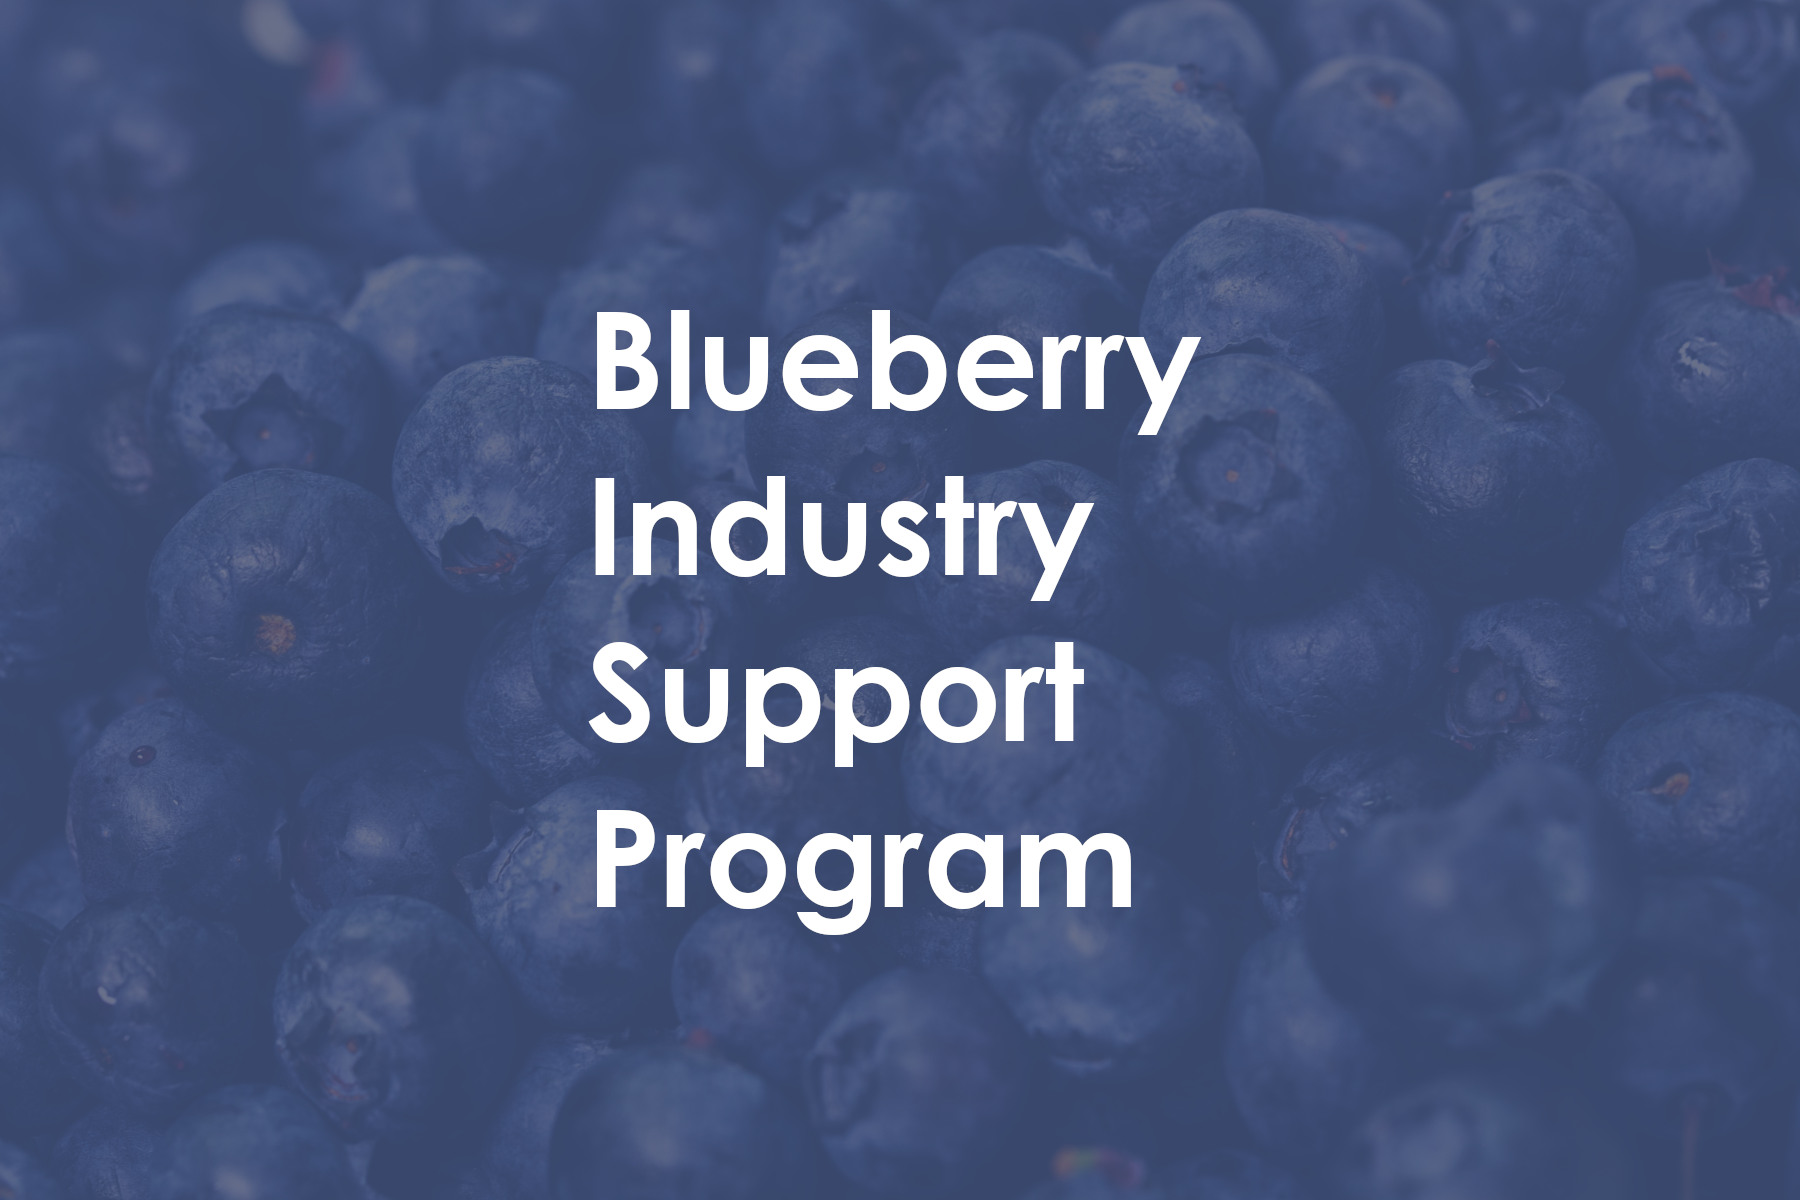 Blueberry Industry Support Program